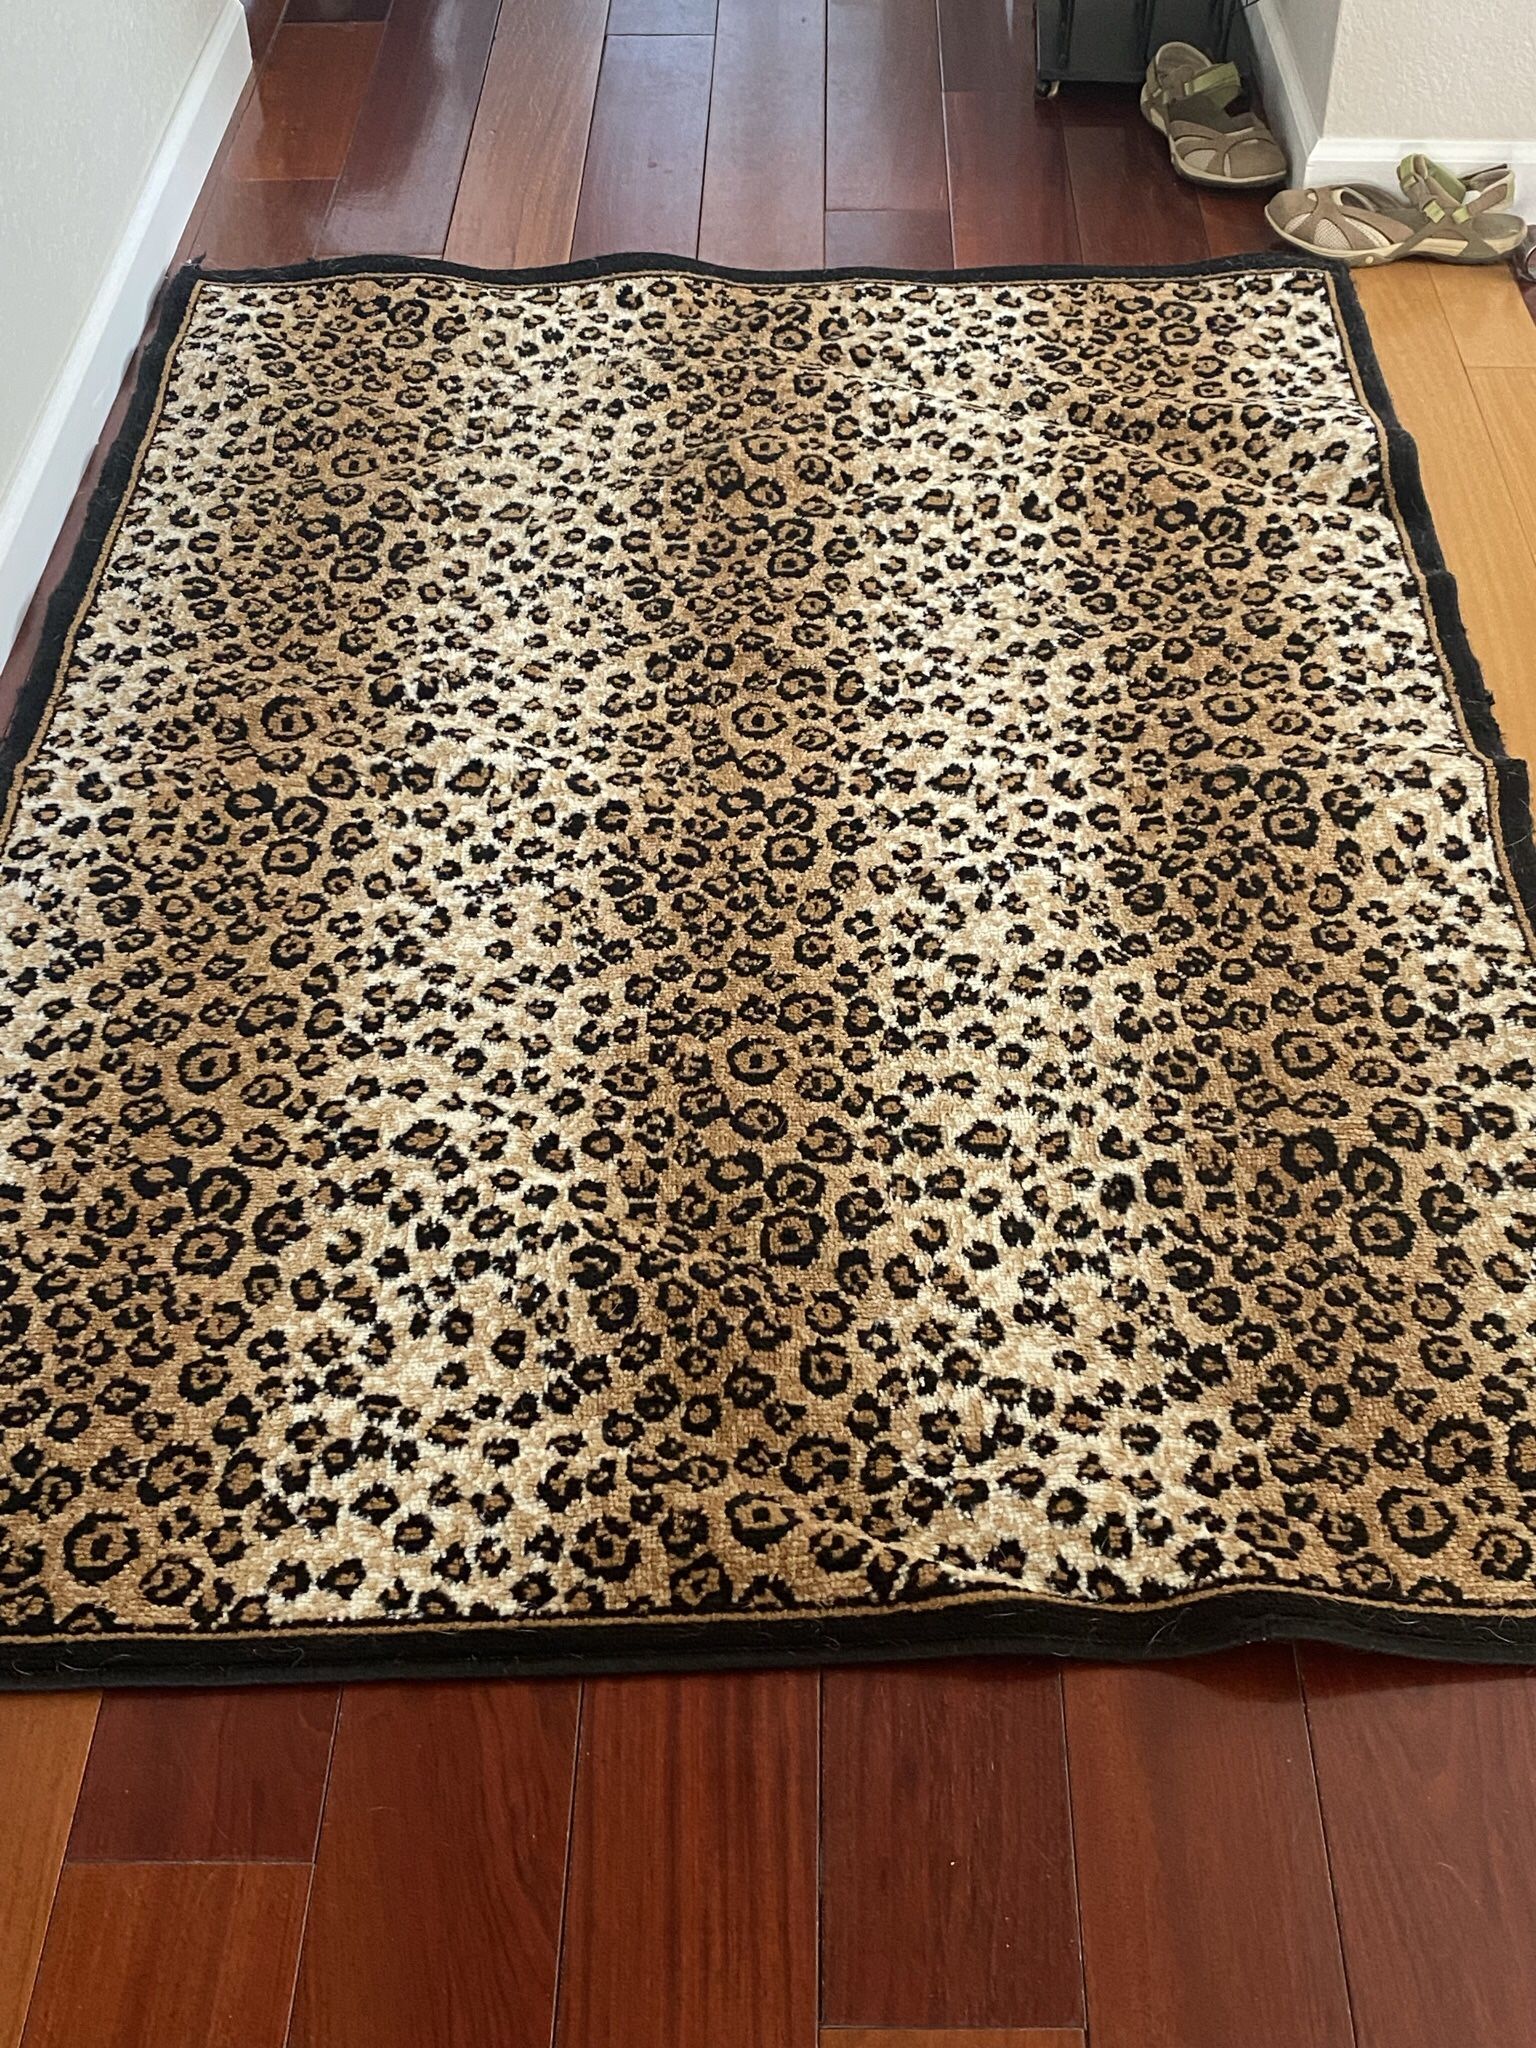 Leopard Area Rugs 4 X 5    ( 2)  Clean in great condition.$10   Each.   Custom Made Gorgeous fabric flower arrangement in unique vase. Large. $25